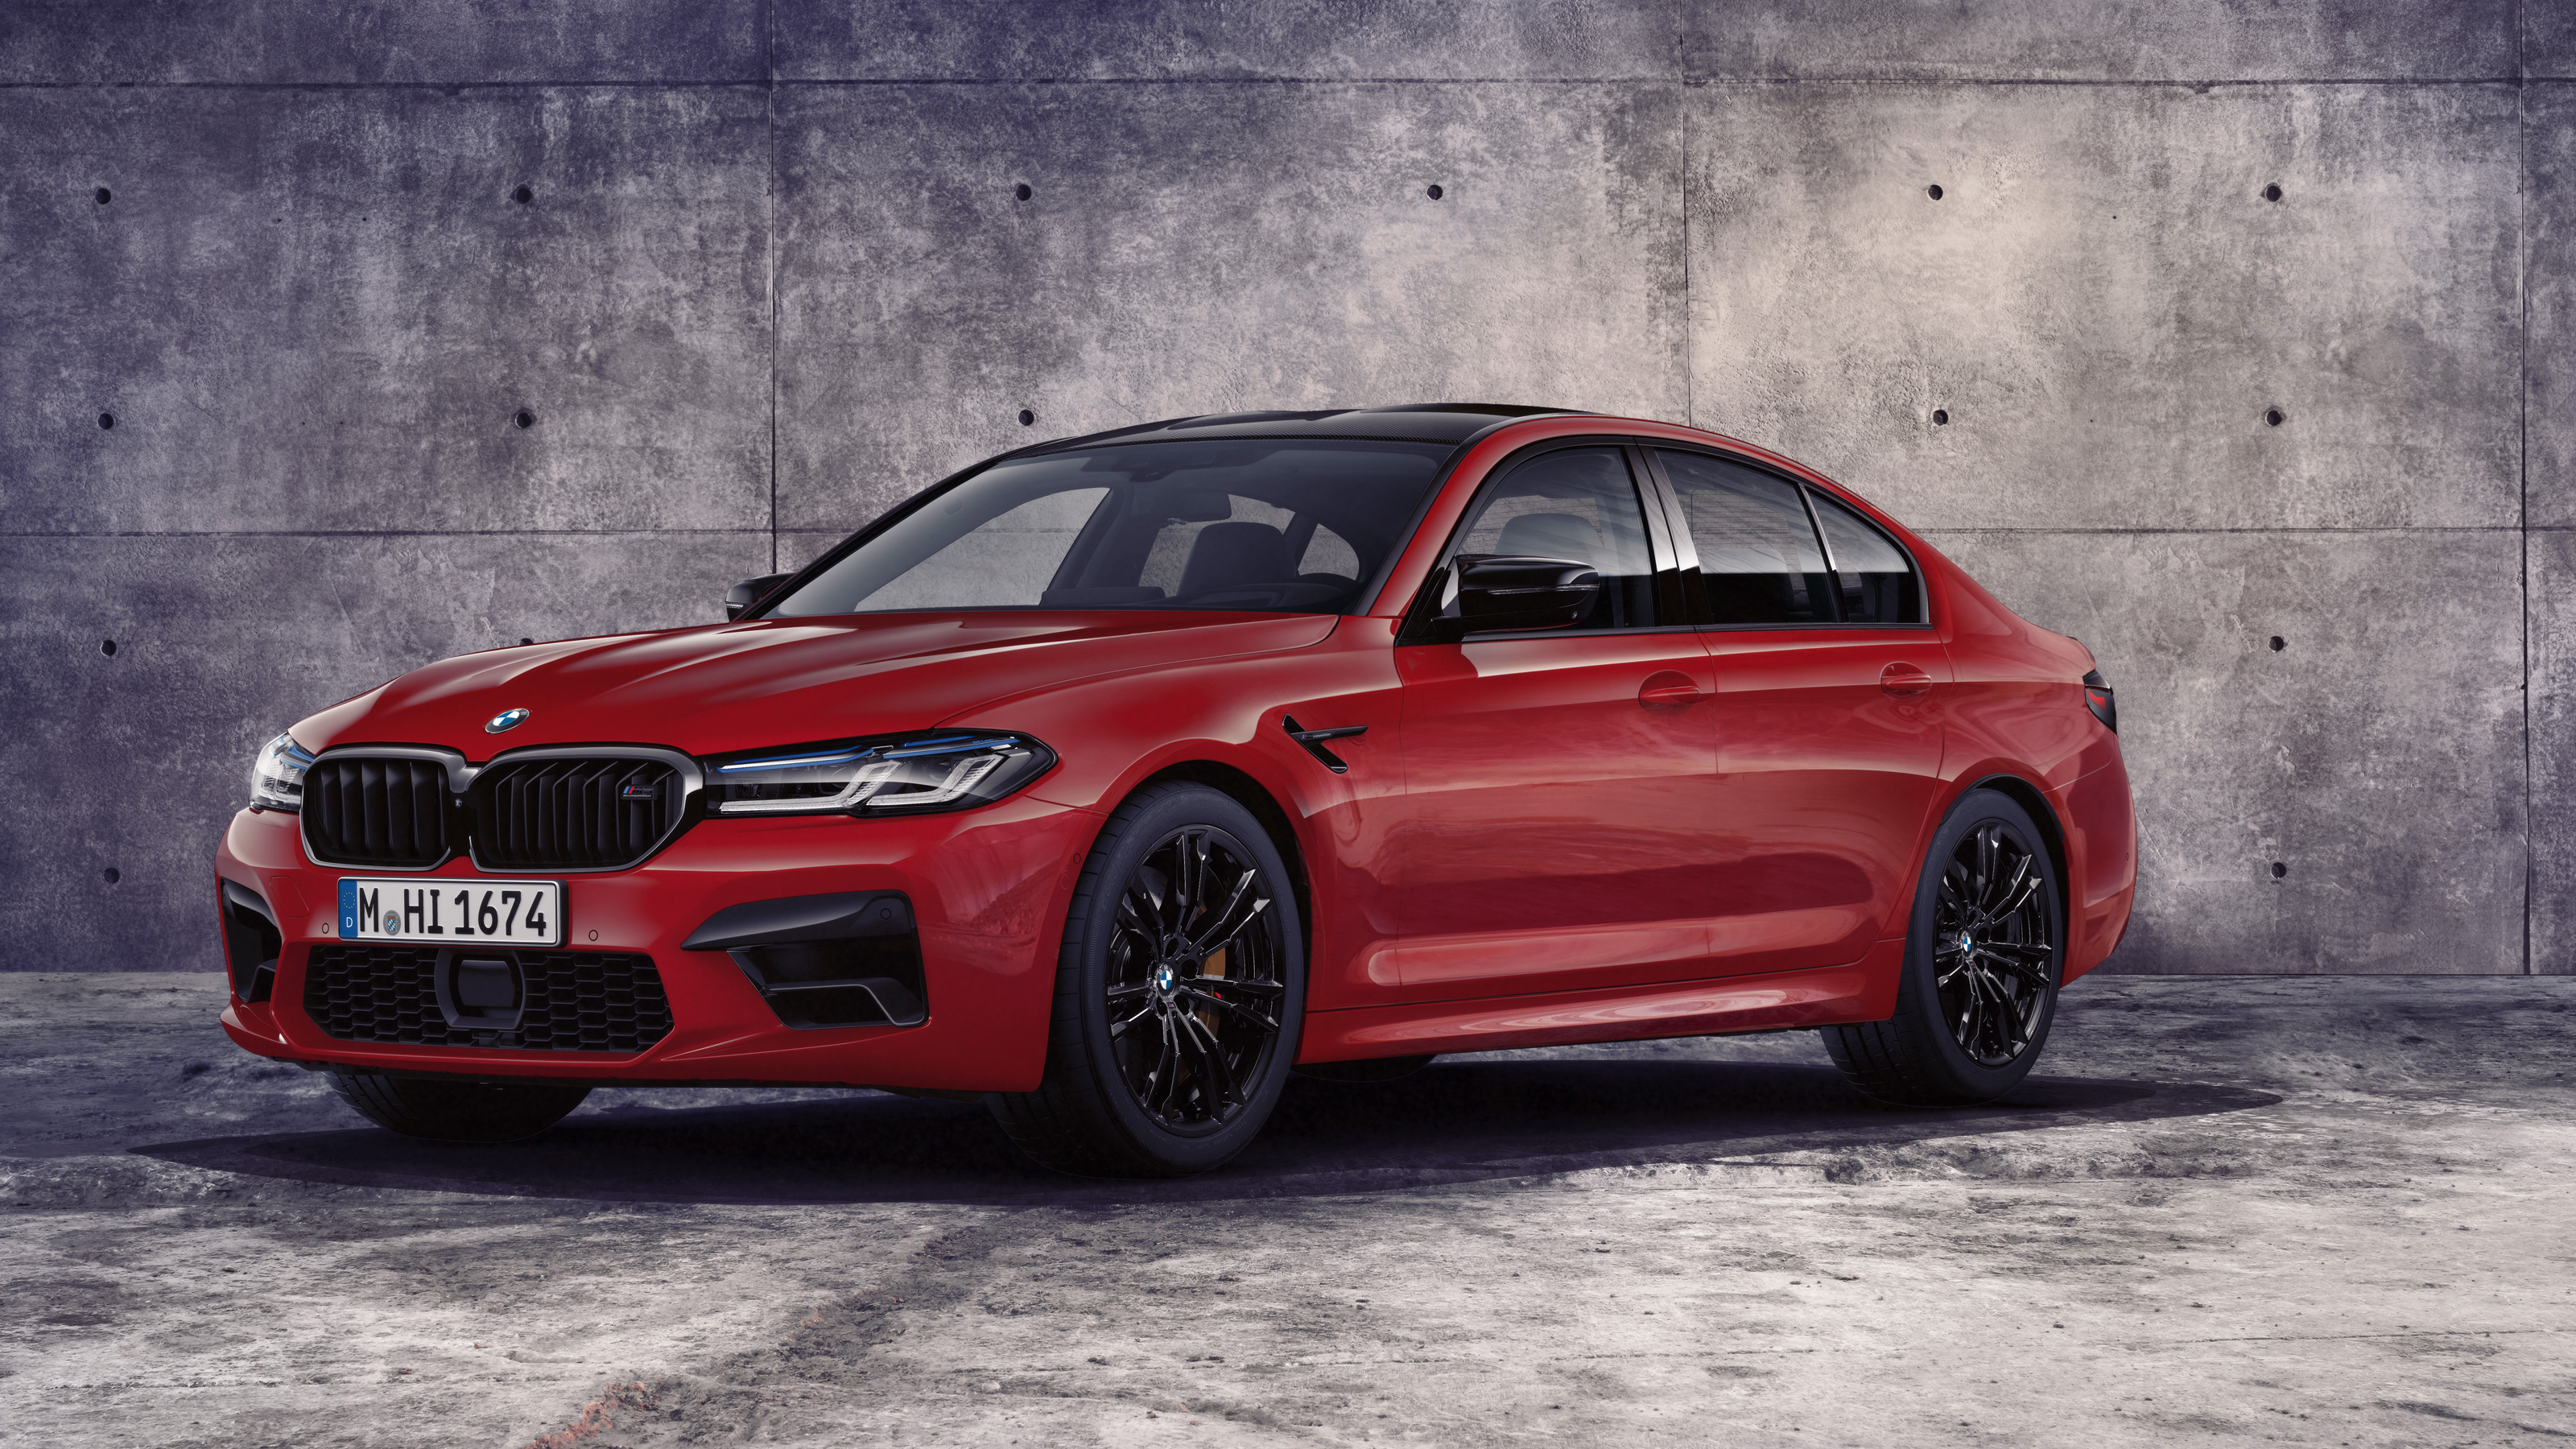 aria-label="2020%20BMW%20M5%20competition%20facelift 2"